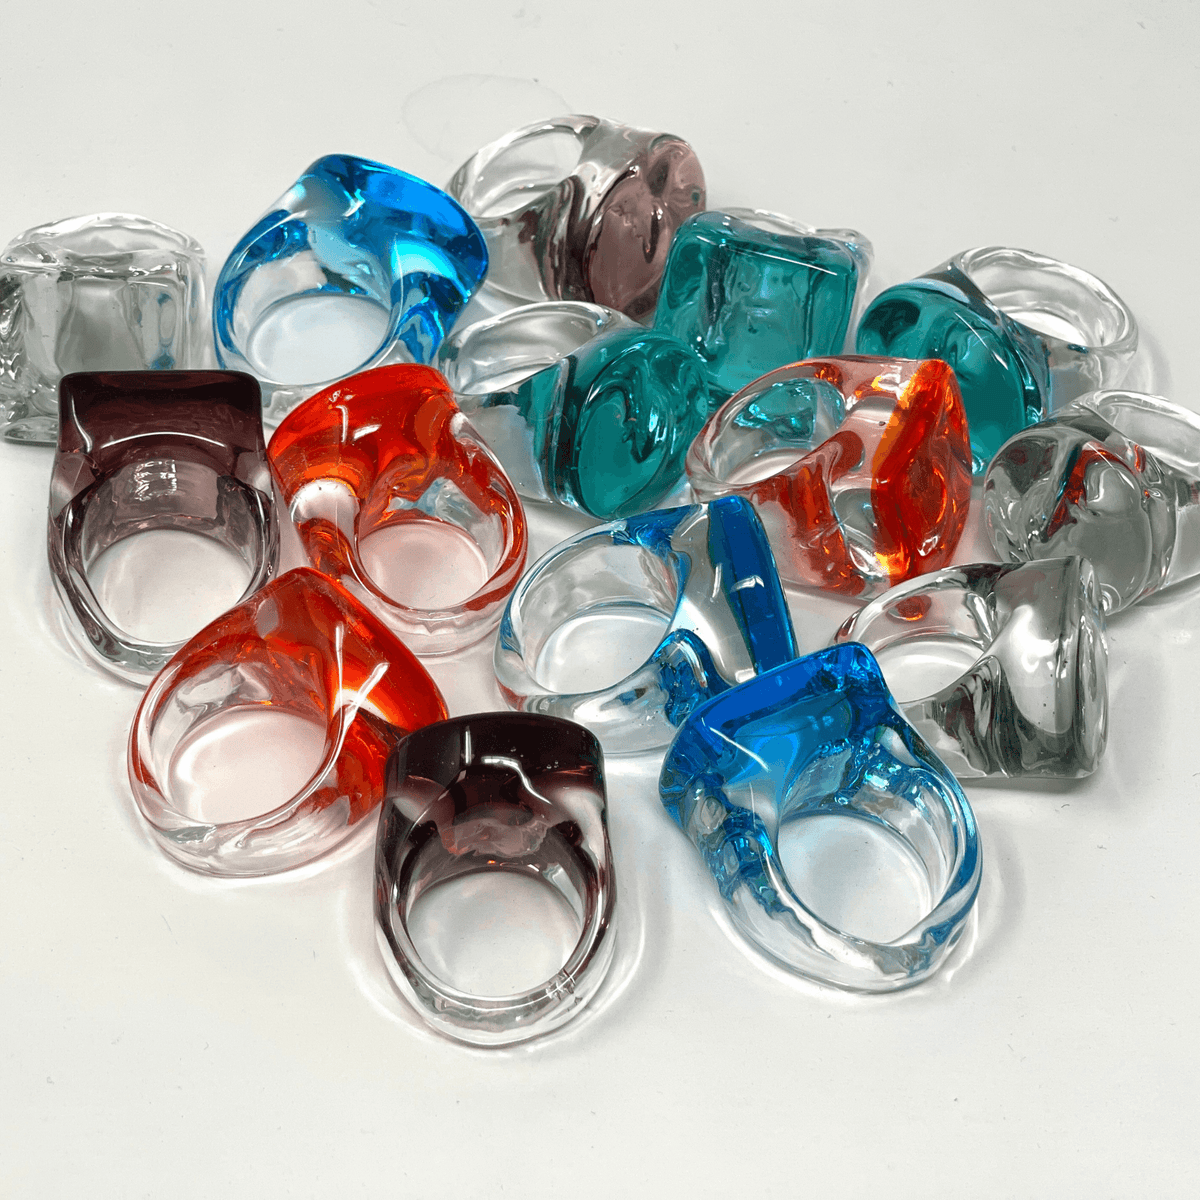 Murano Glass Statement Rings, Sky Blue Glass, Oval, Square or Round at MyItalianDecor